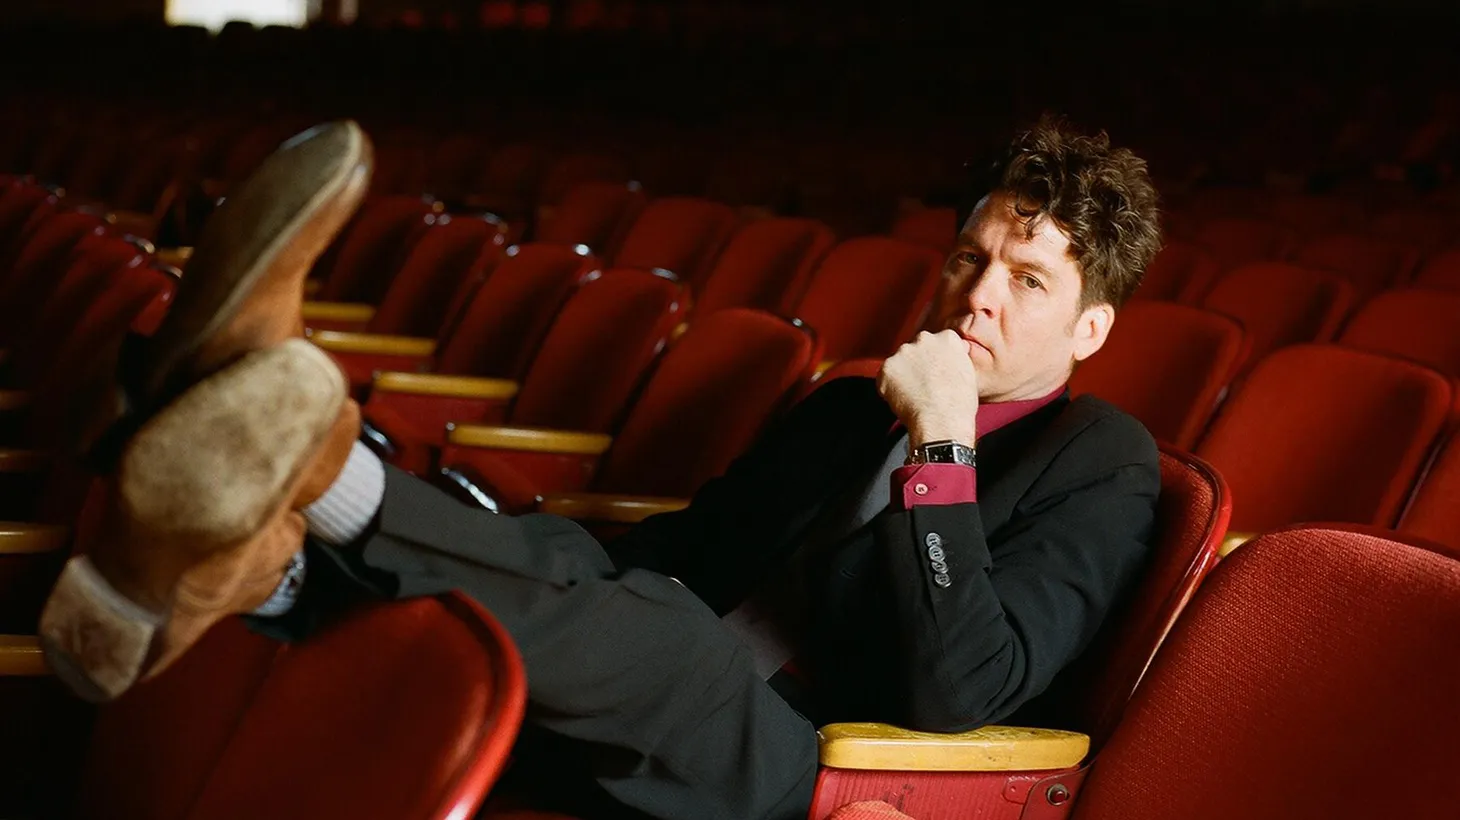 Joe Henry is a Grammy Award-winning producer and prolific artist. DJ Chris Douridas thinks Henry’s new album is among his best and calls it “a tremendous piece of work.” You can hear a full band performance on Morning Becomes Eclectic at 11:15am.